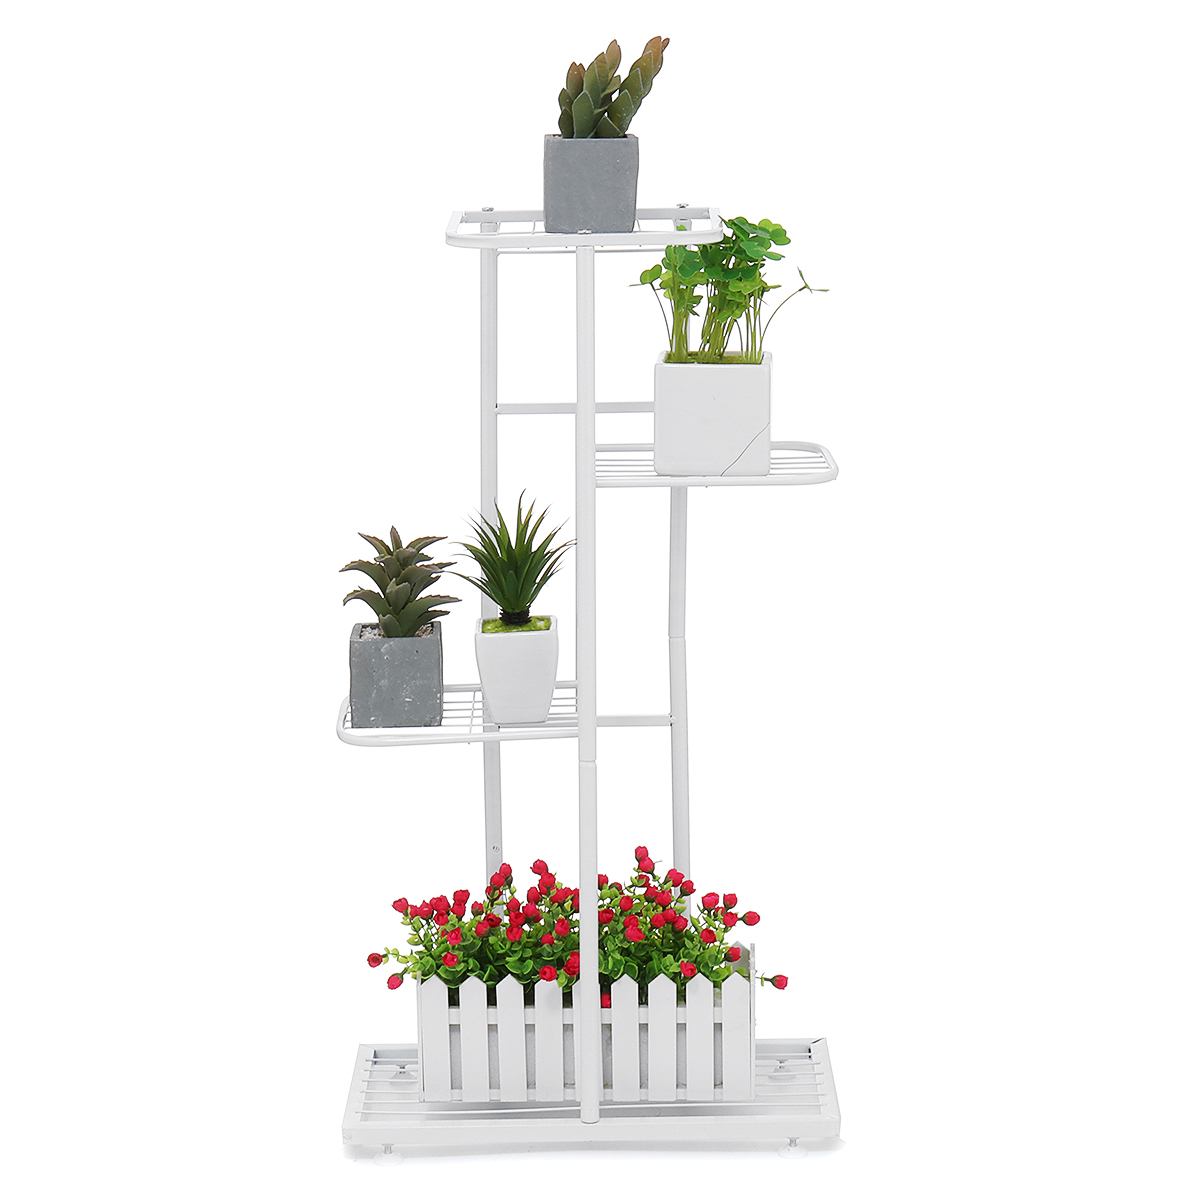 4-Layers-Retro-Iron-Flower-Stand-Pot-Plant-Display-Shelves-Garden-Home-Decoration-1720861-4